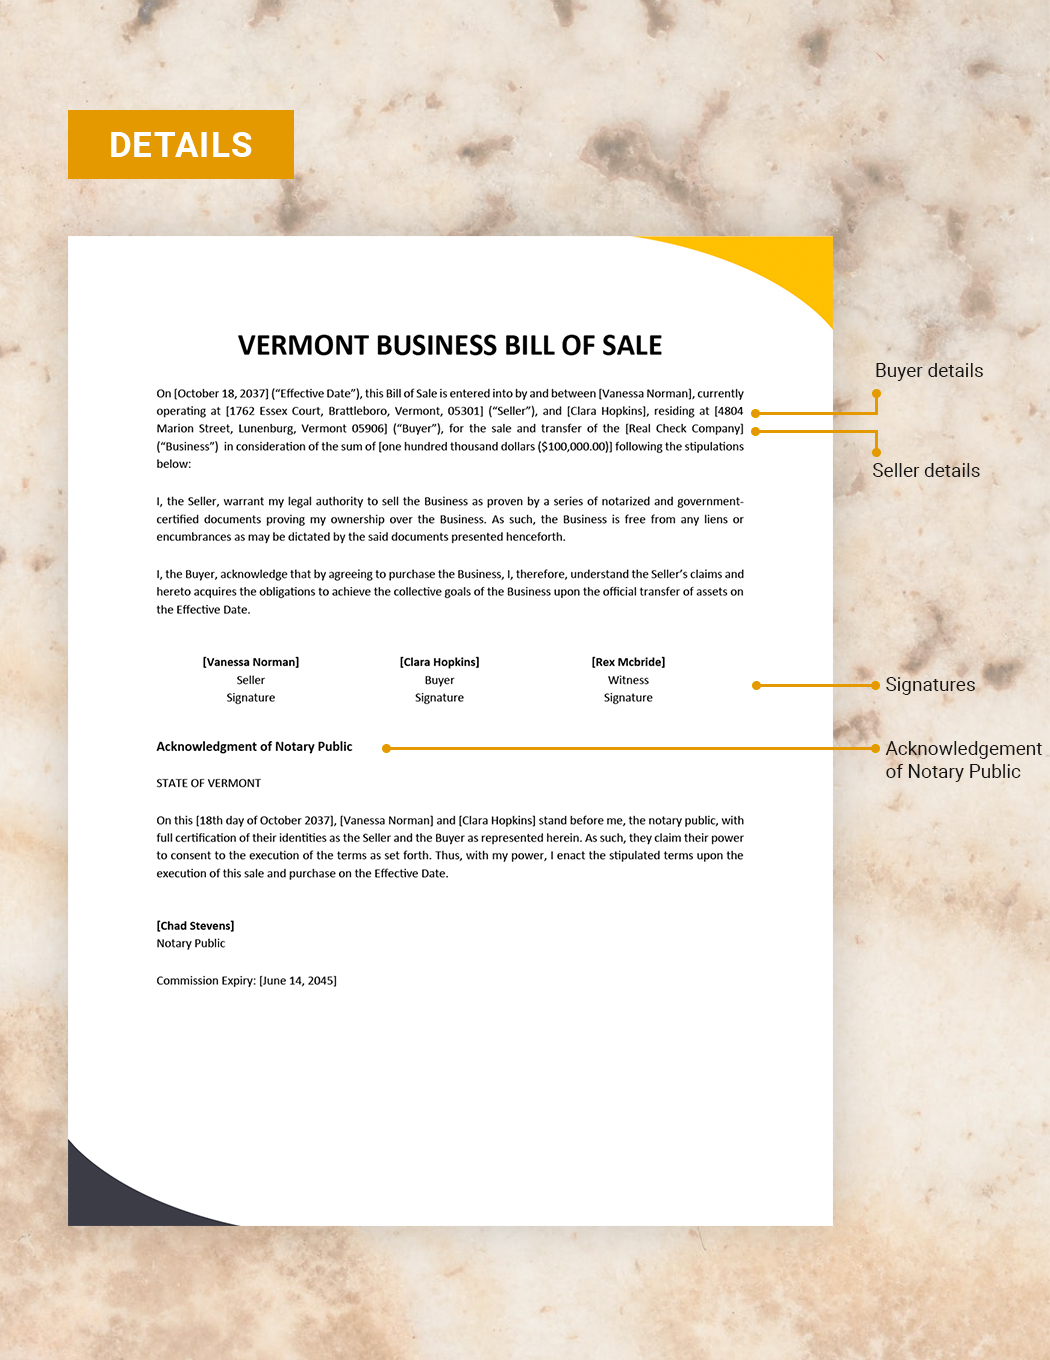 Vermont Business Bill of Sale Template